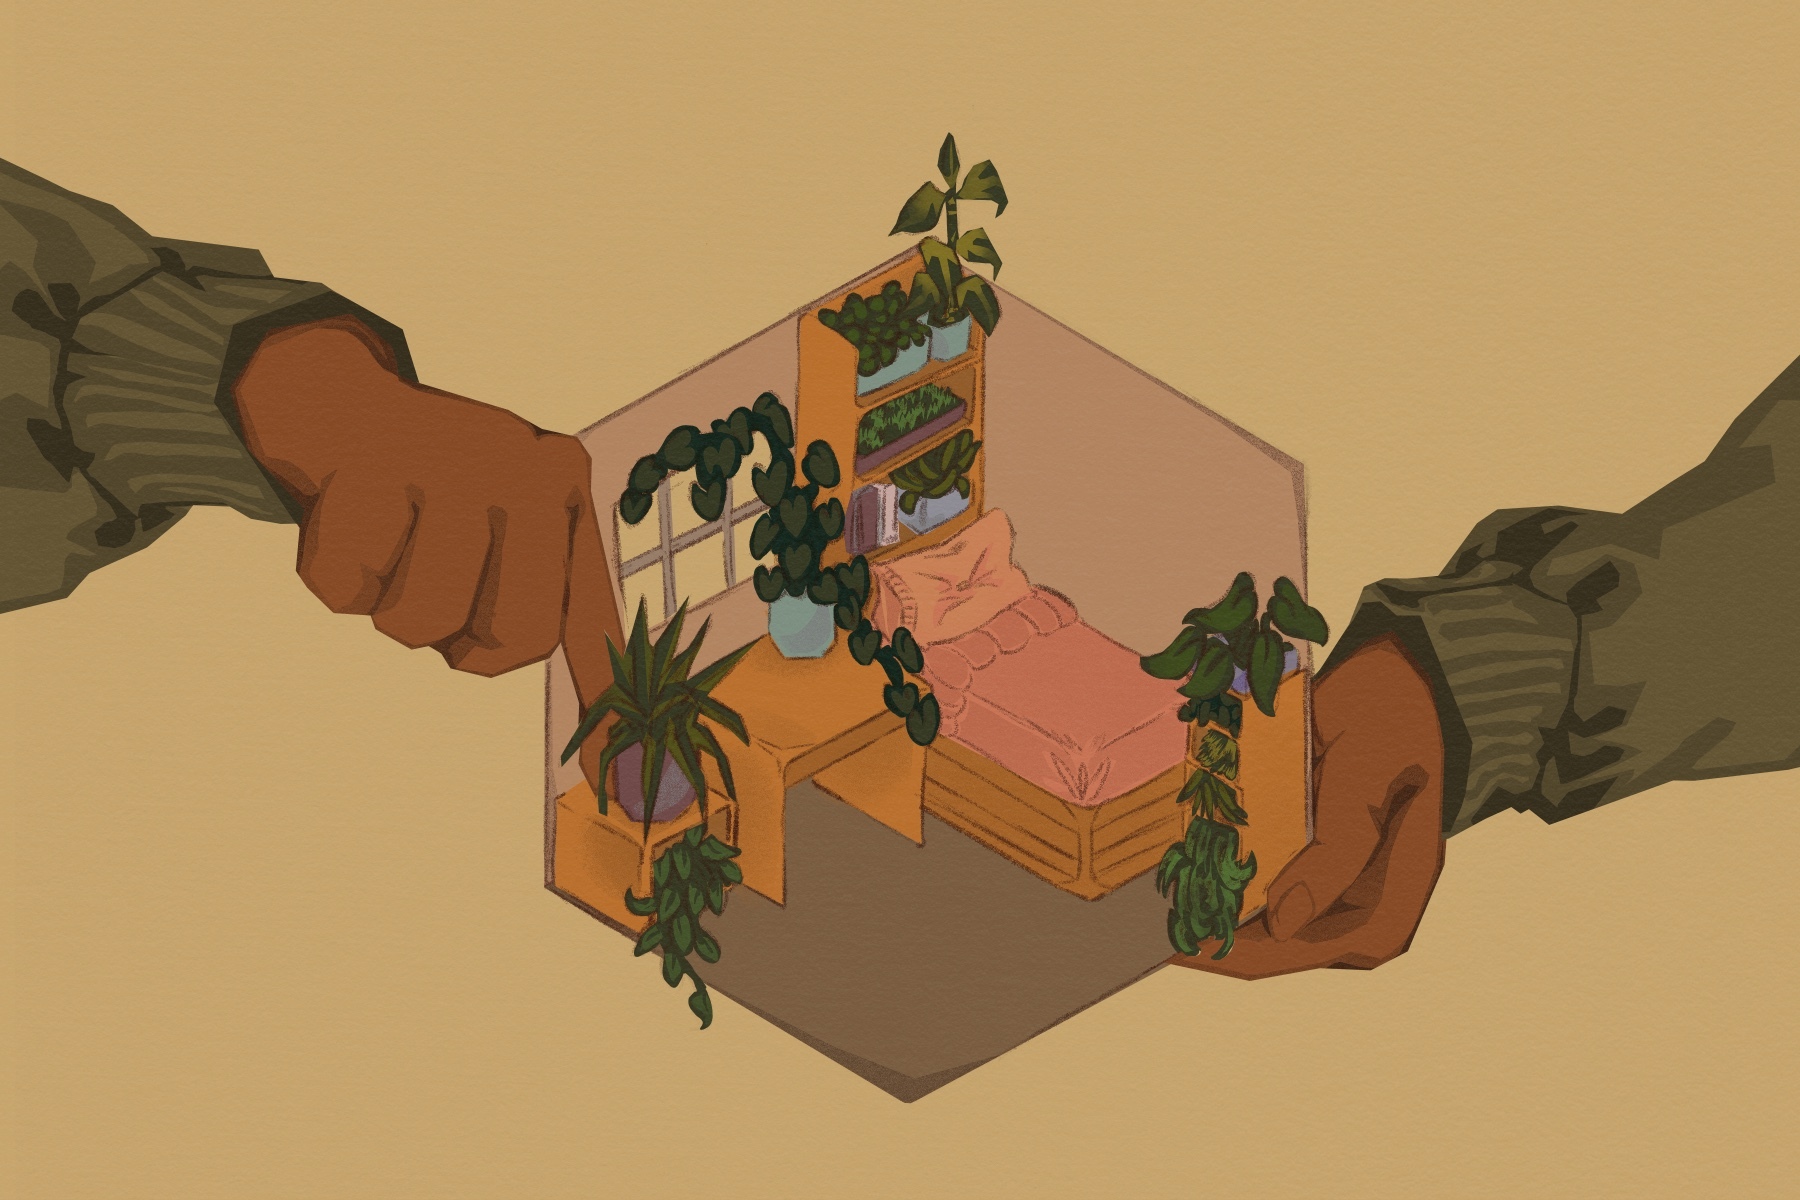 In an article about indoor gardening, a pair of hands hold a cross section of a bedroom, which contains a pink bed, a bookshelf, and a desk, and is full of green plants.